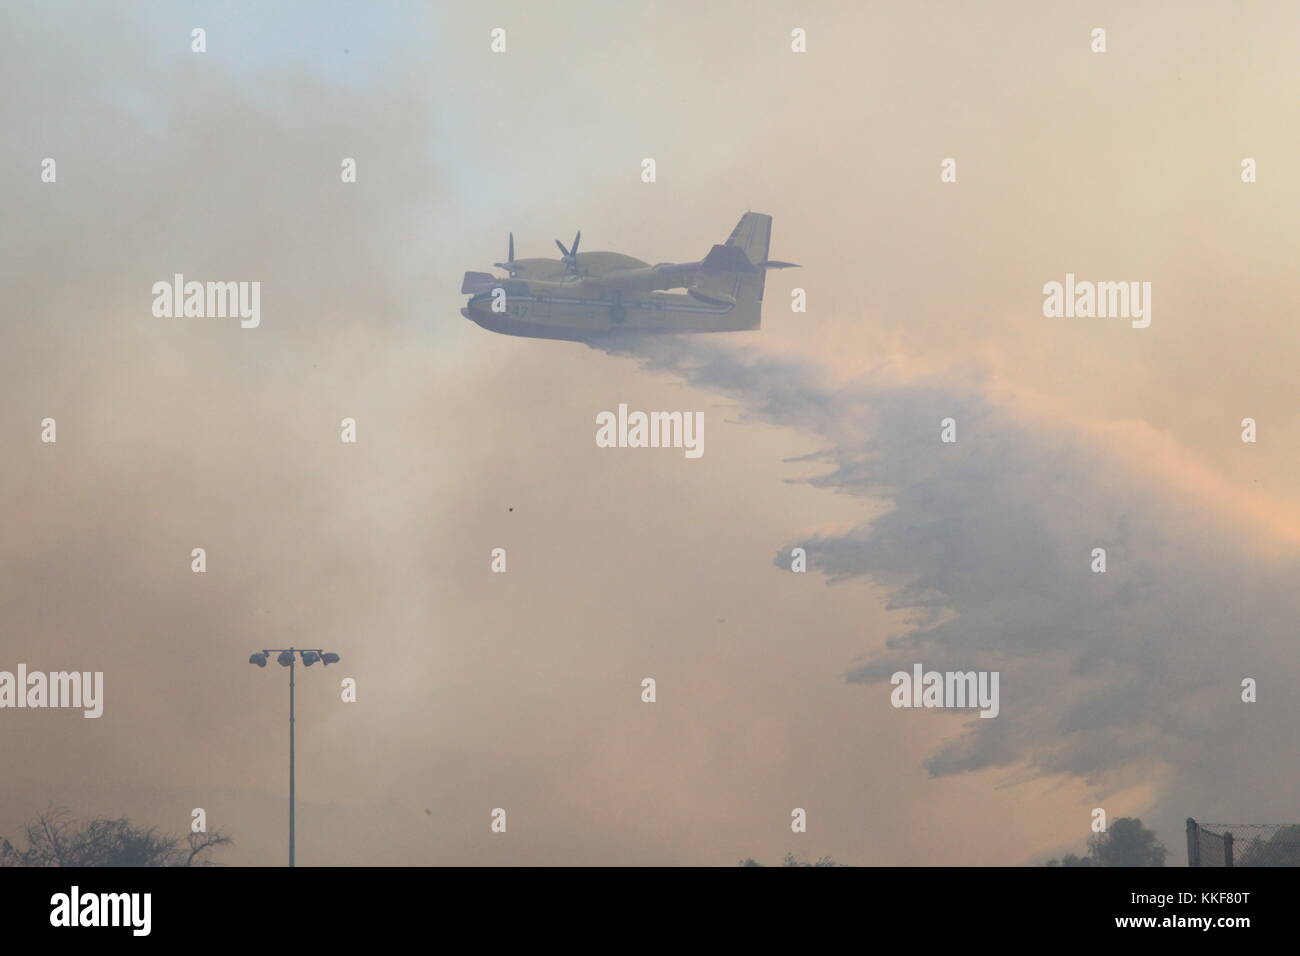 California, USA. 5th Dec, 2017. A plane drops water in Ventura County of California, the United States, Dec. 5, 2017. Brush fires across the region were fed by extremely high winds, low humidities and dry fuel. Hundreds of fire fighters have been working very hard to minimize damage to property and evacuations are taking place in many places in south California, said authorities. Credit: Huang Heng/Xinhua/Alamy Live News Stock Photo